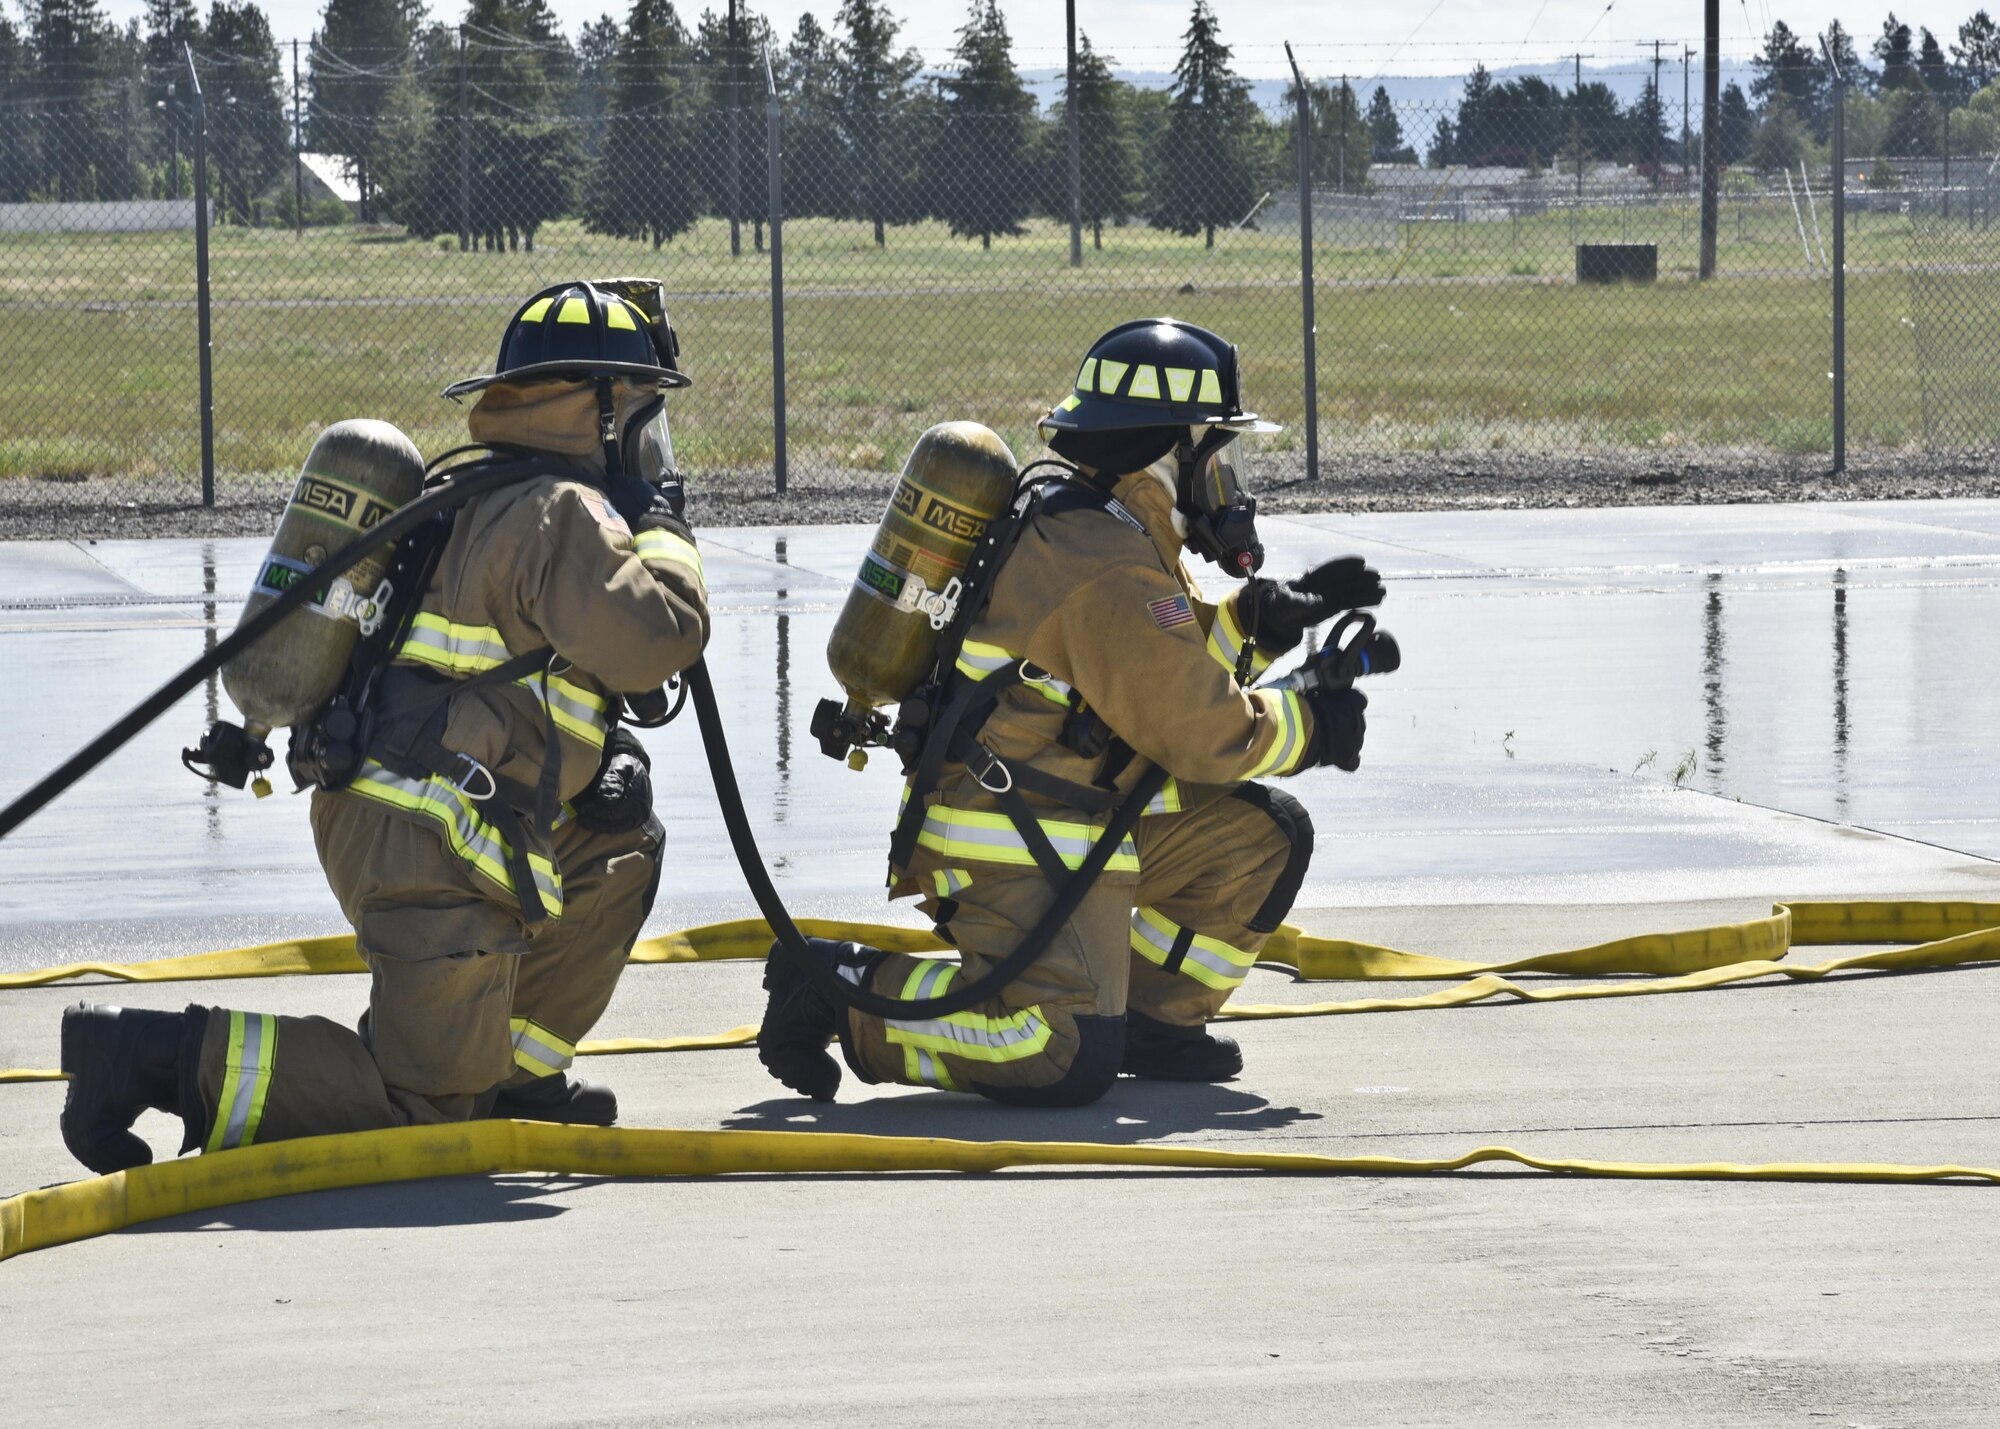 Staff Sgt. Michael Granados and Staff Sgt. Kari Dudoit, 92nd Civil Engineer Squadron firefighters, prepare to shoot water during an exercise with the Spokane International Airport June 9, 2016, in Spokane, Wash. The exercise included more than 40 local emergency responders from around the county to include: Spokane International Airport Fire and Rescue, Spokane International Airport Police Department, Spokane Fire Department, Fairchild Air Force Base Fire Department, Spokane County Fire District 10 and American Medical Response. (U.S. Air Force photo/Airman 1st Class Taylor Shelton)